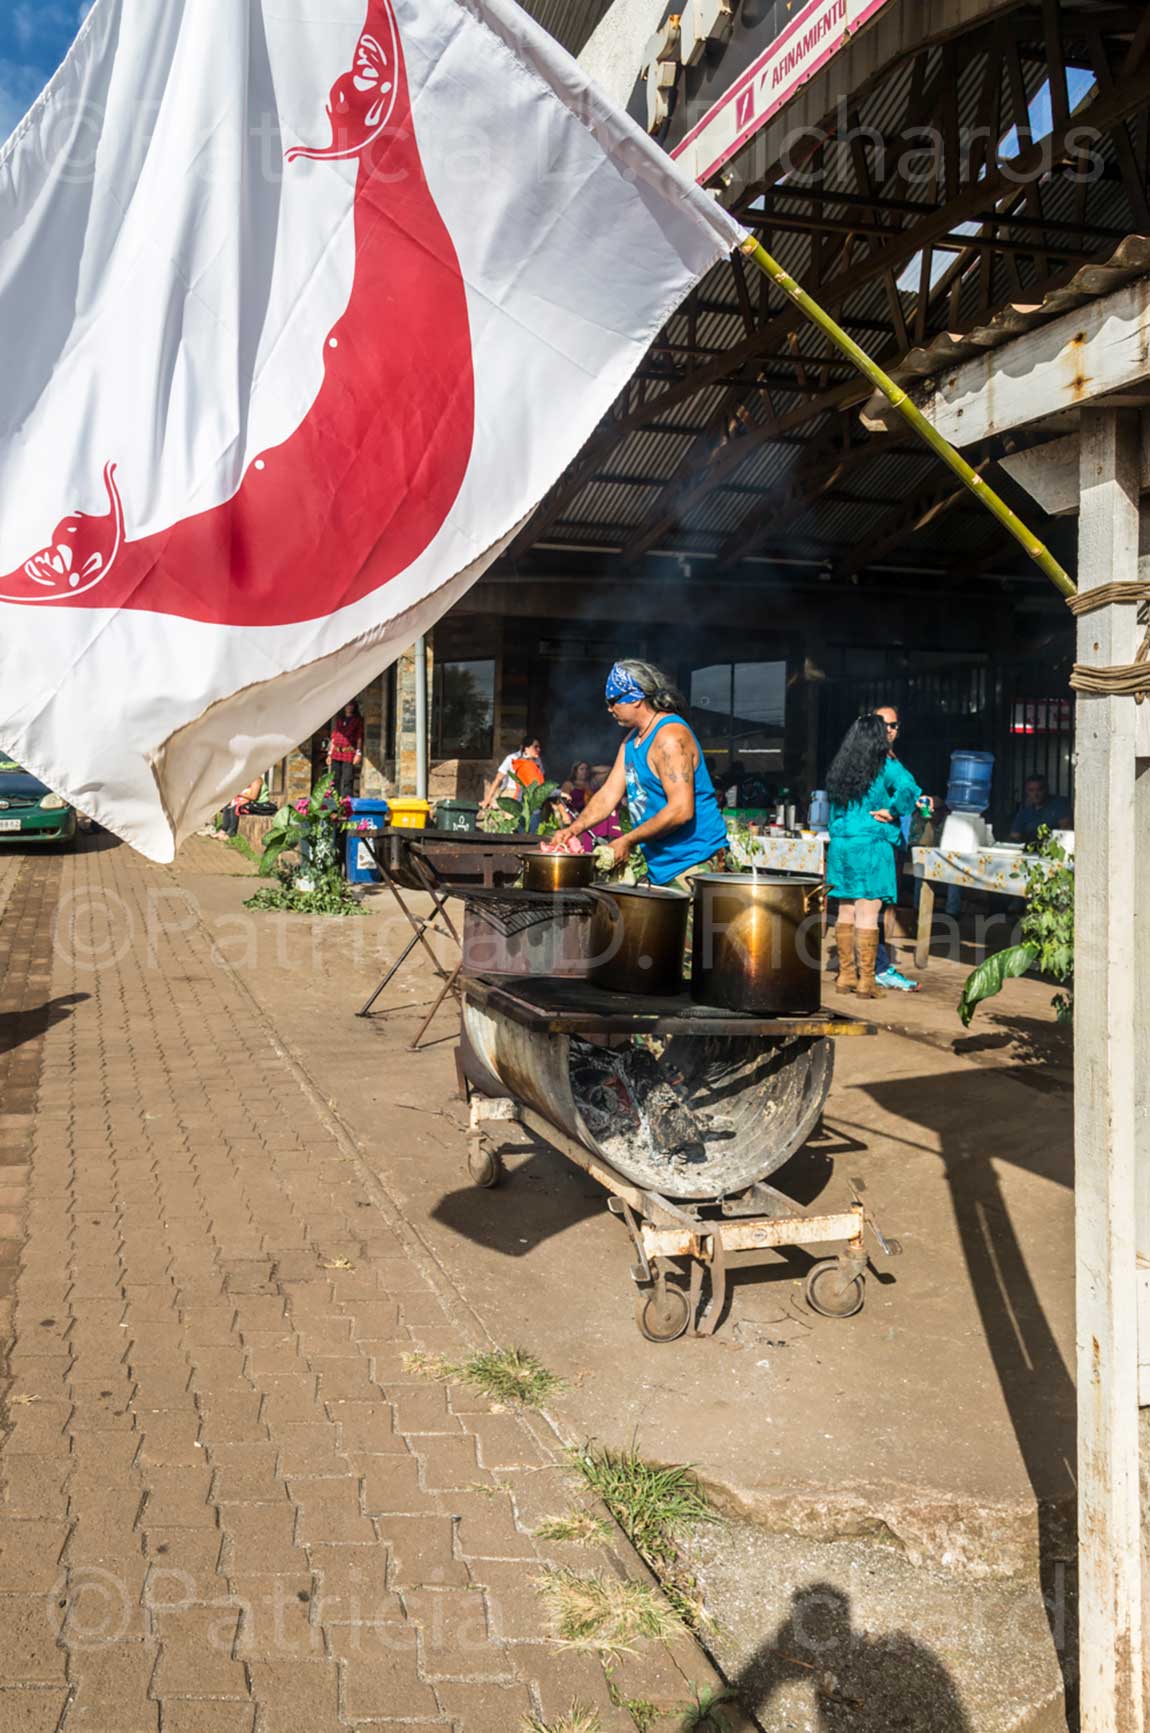 villlage-barbeque-with-rapa-nui-flag